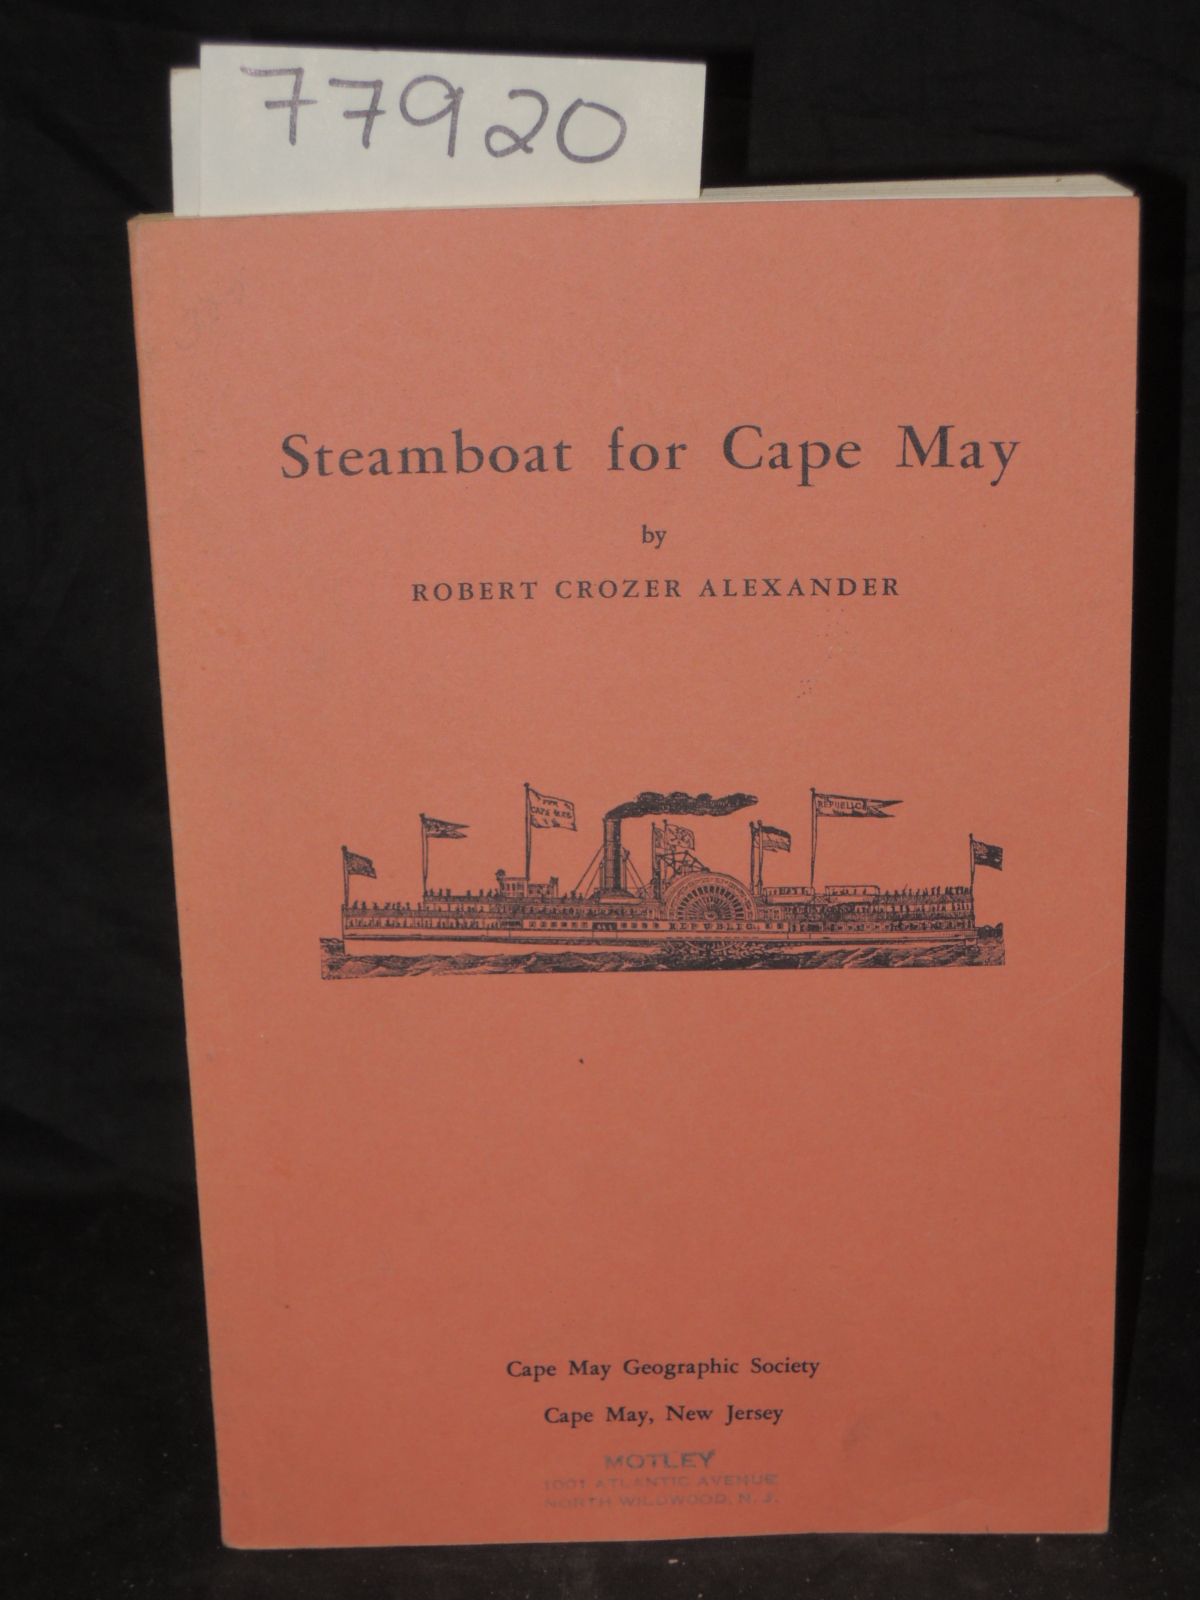 Alexander, Robert Crozer: STEAMBOAT FOR CAPE MAY